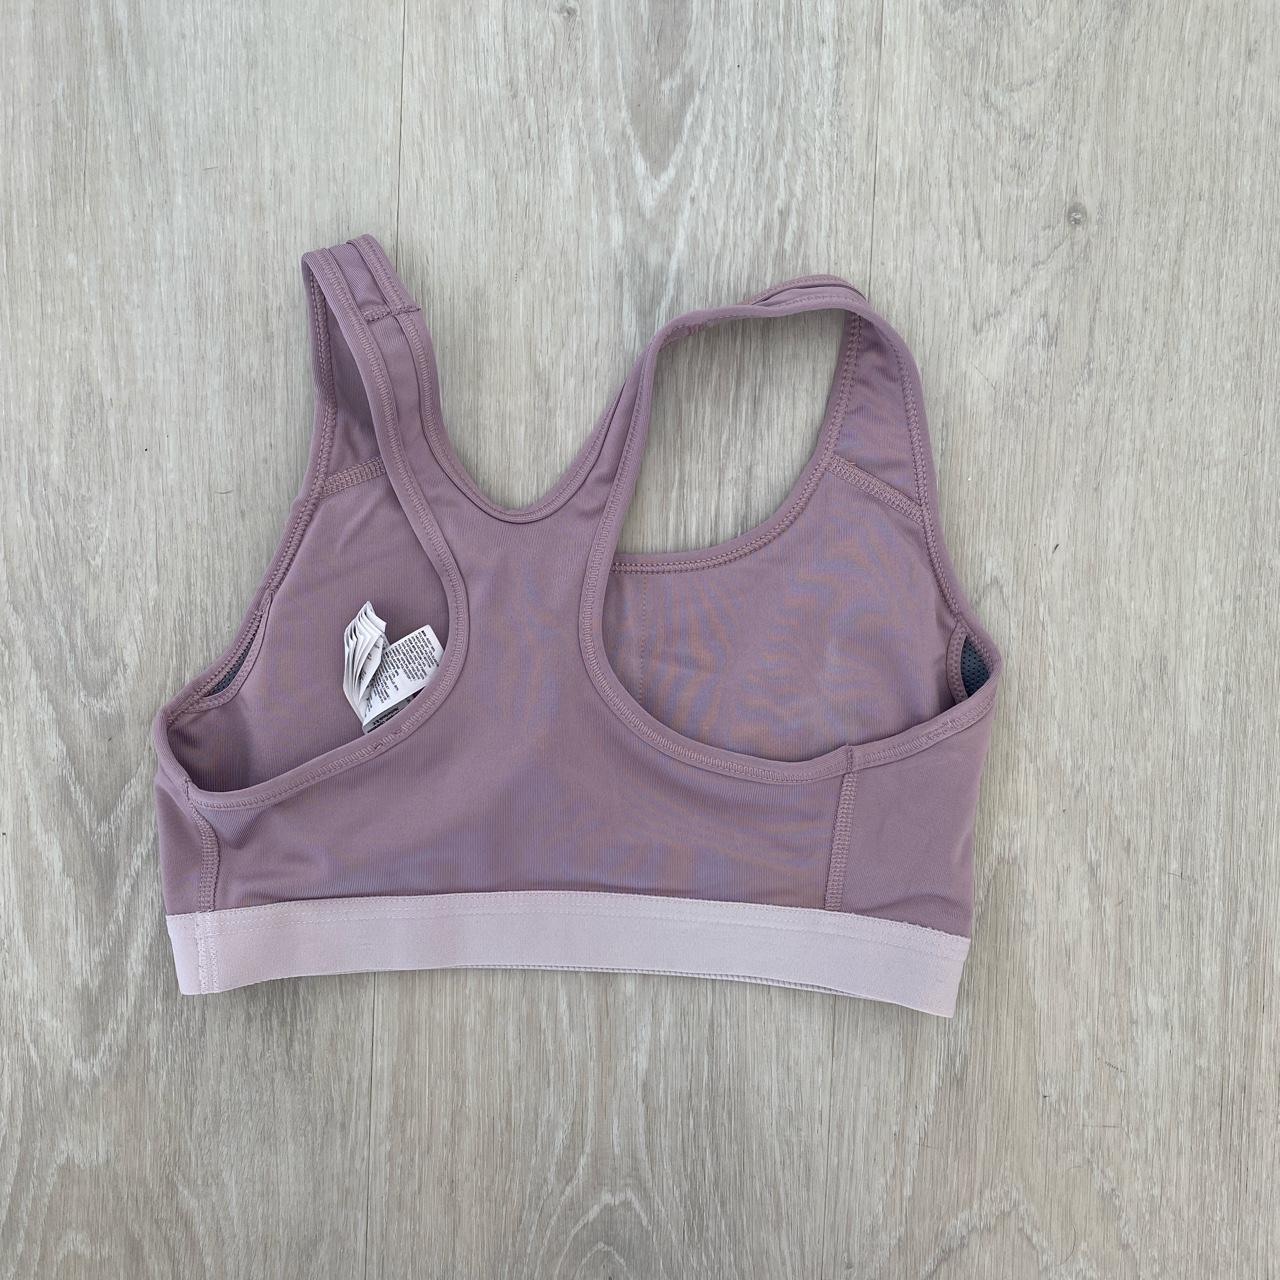 Product Image 2 - Nike sports bra 
Perfect condition